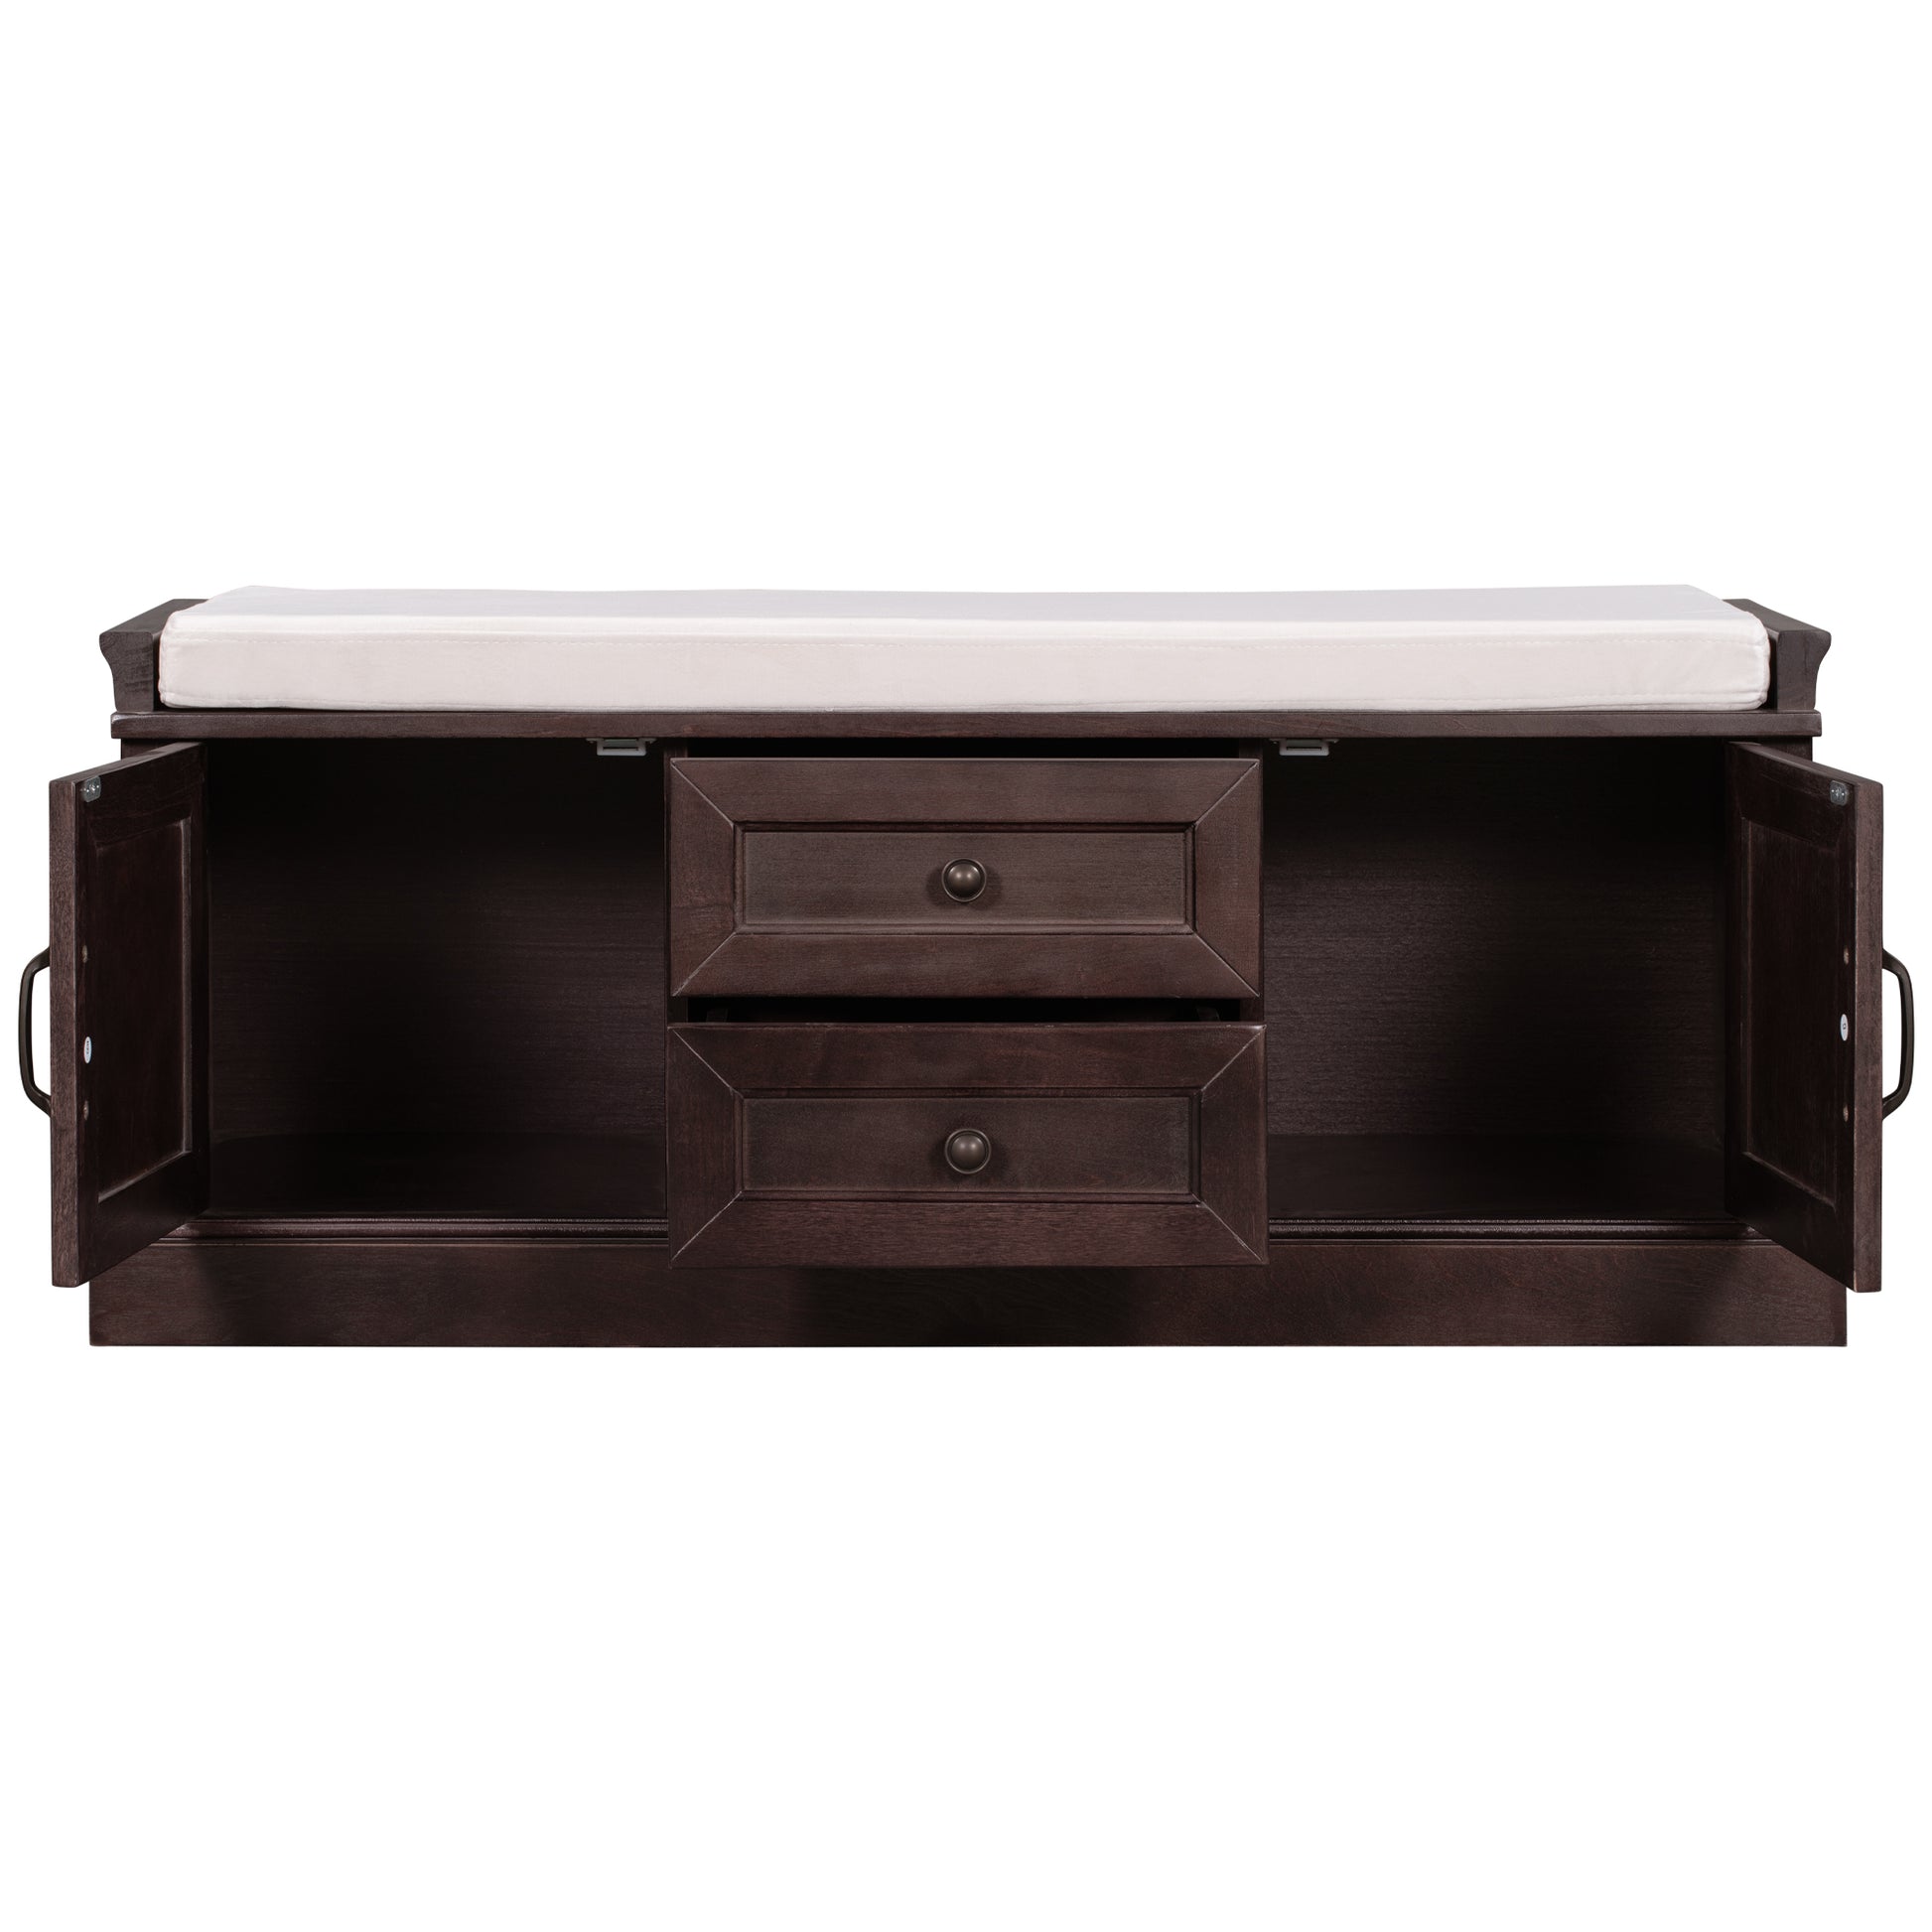 TREXM Storage Bench with 2 Drawers and 2 Cabinets - Espresso